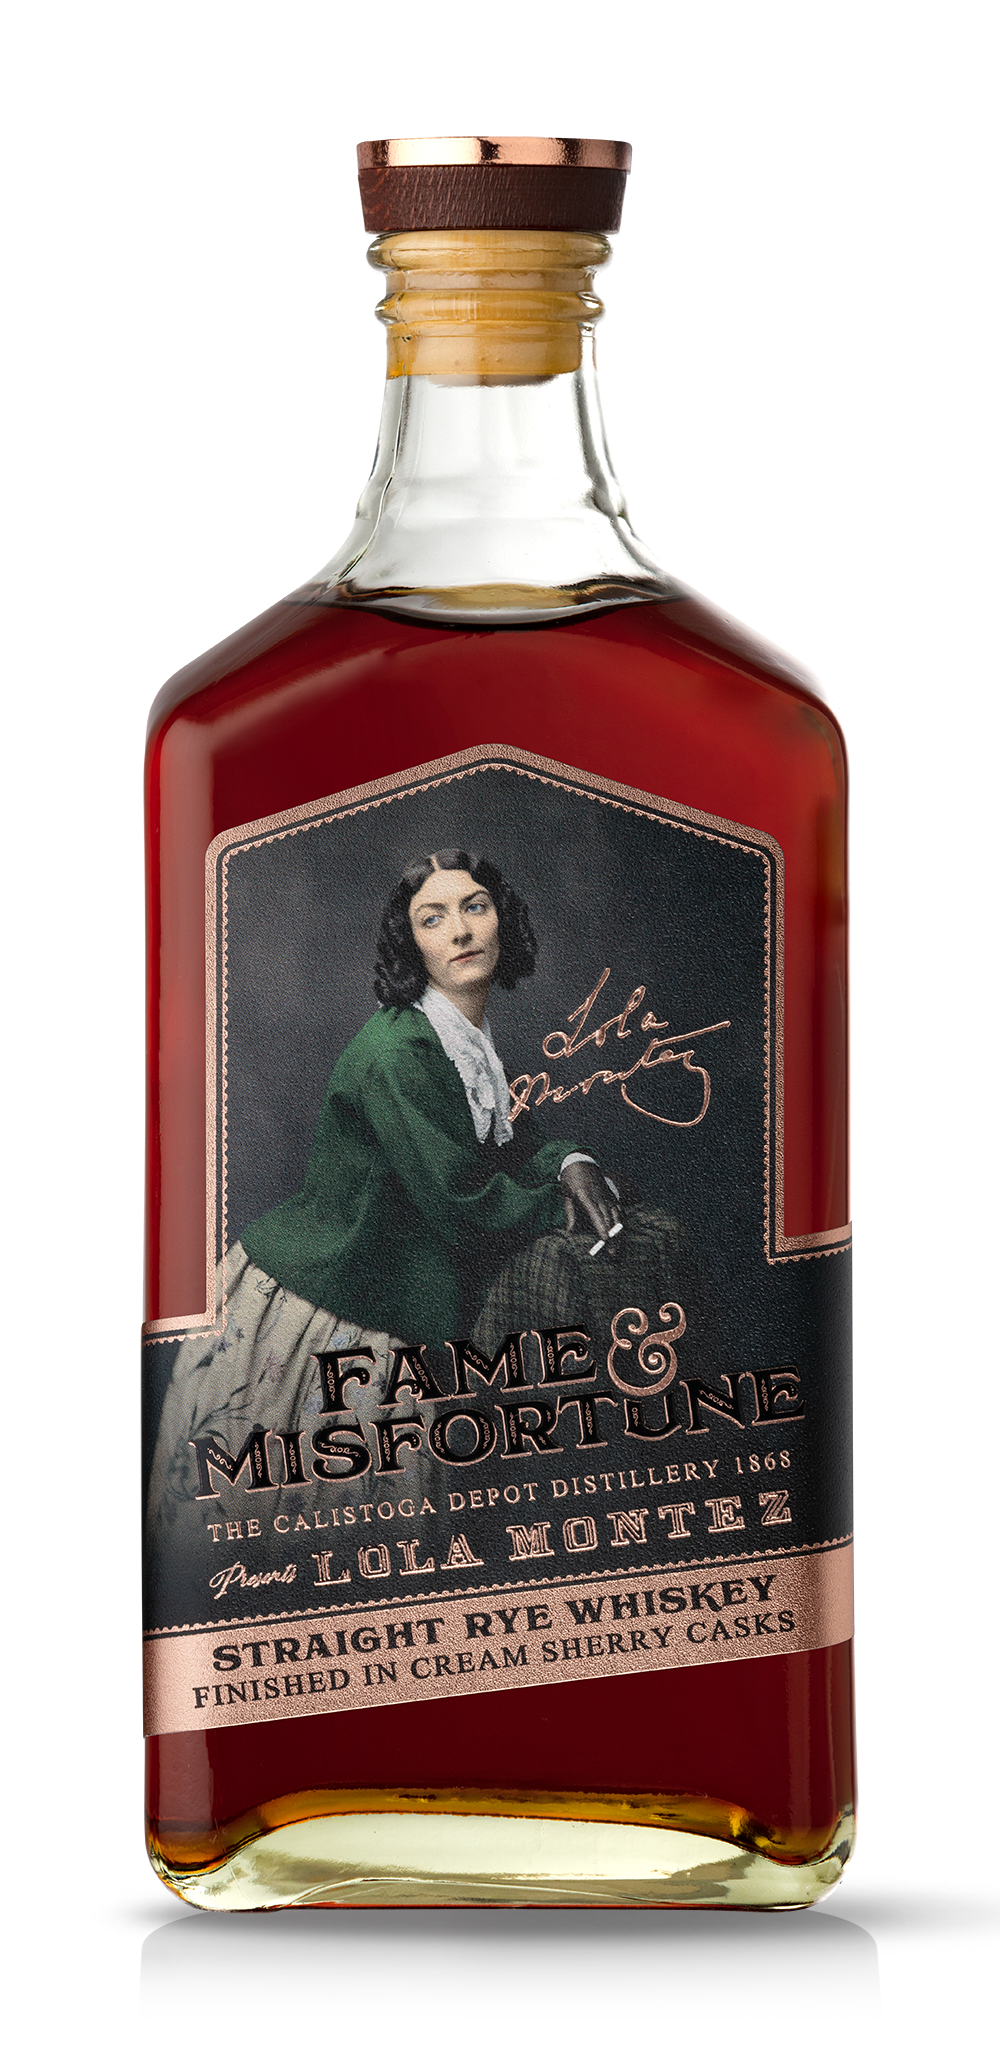 Fame & Misfortune Straight Rye Whiskey Finished in Cream Sherry Casks by the Calistoga Depot Spirits